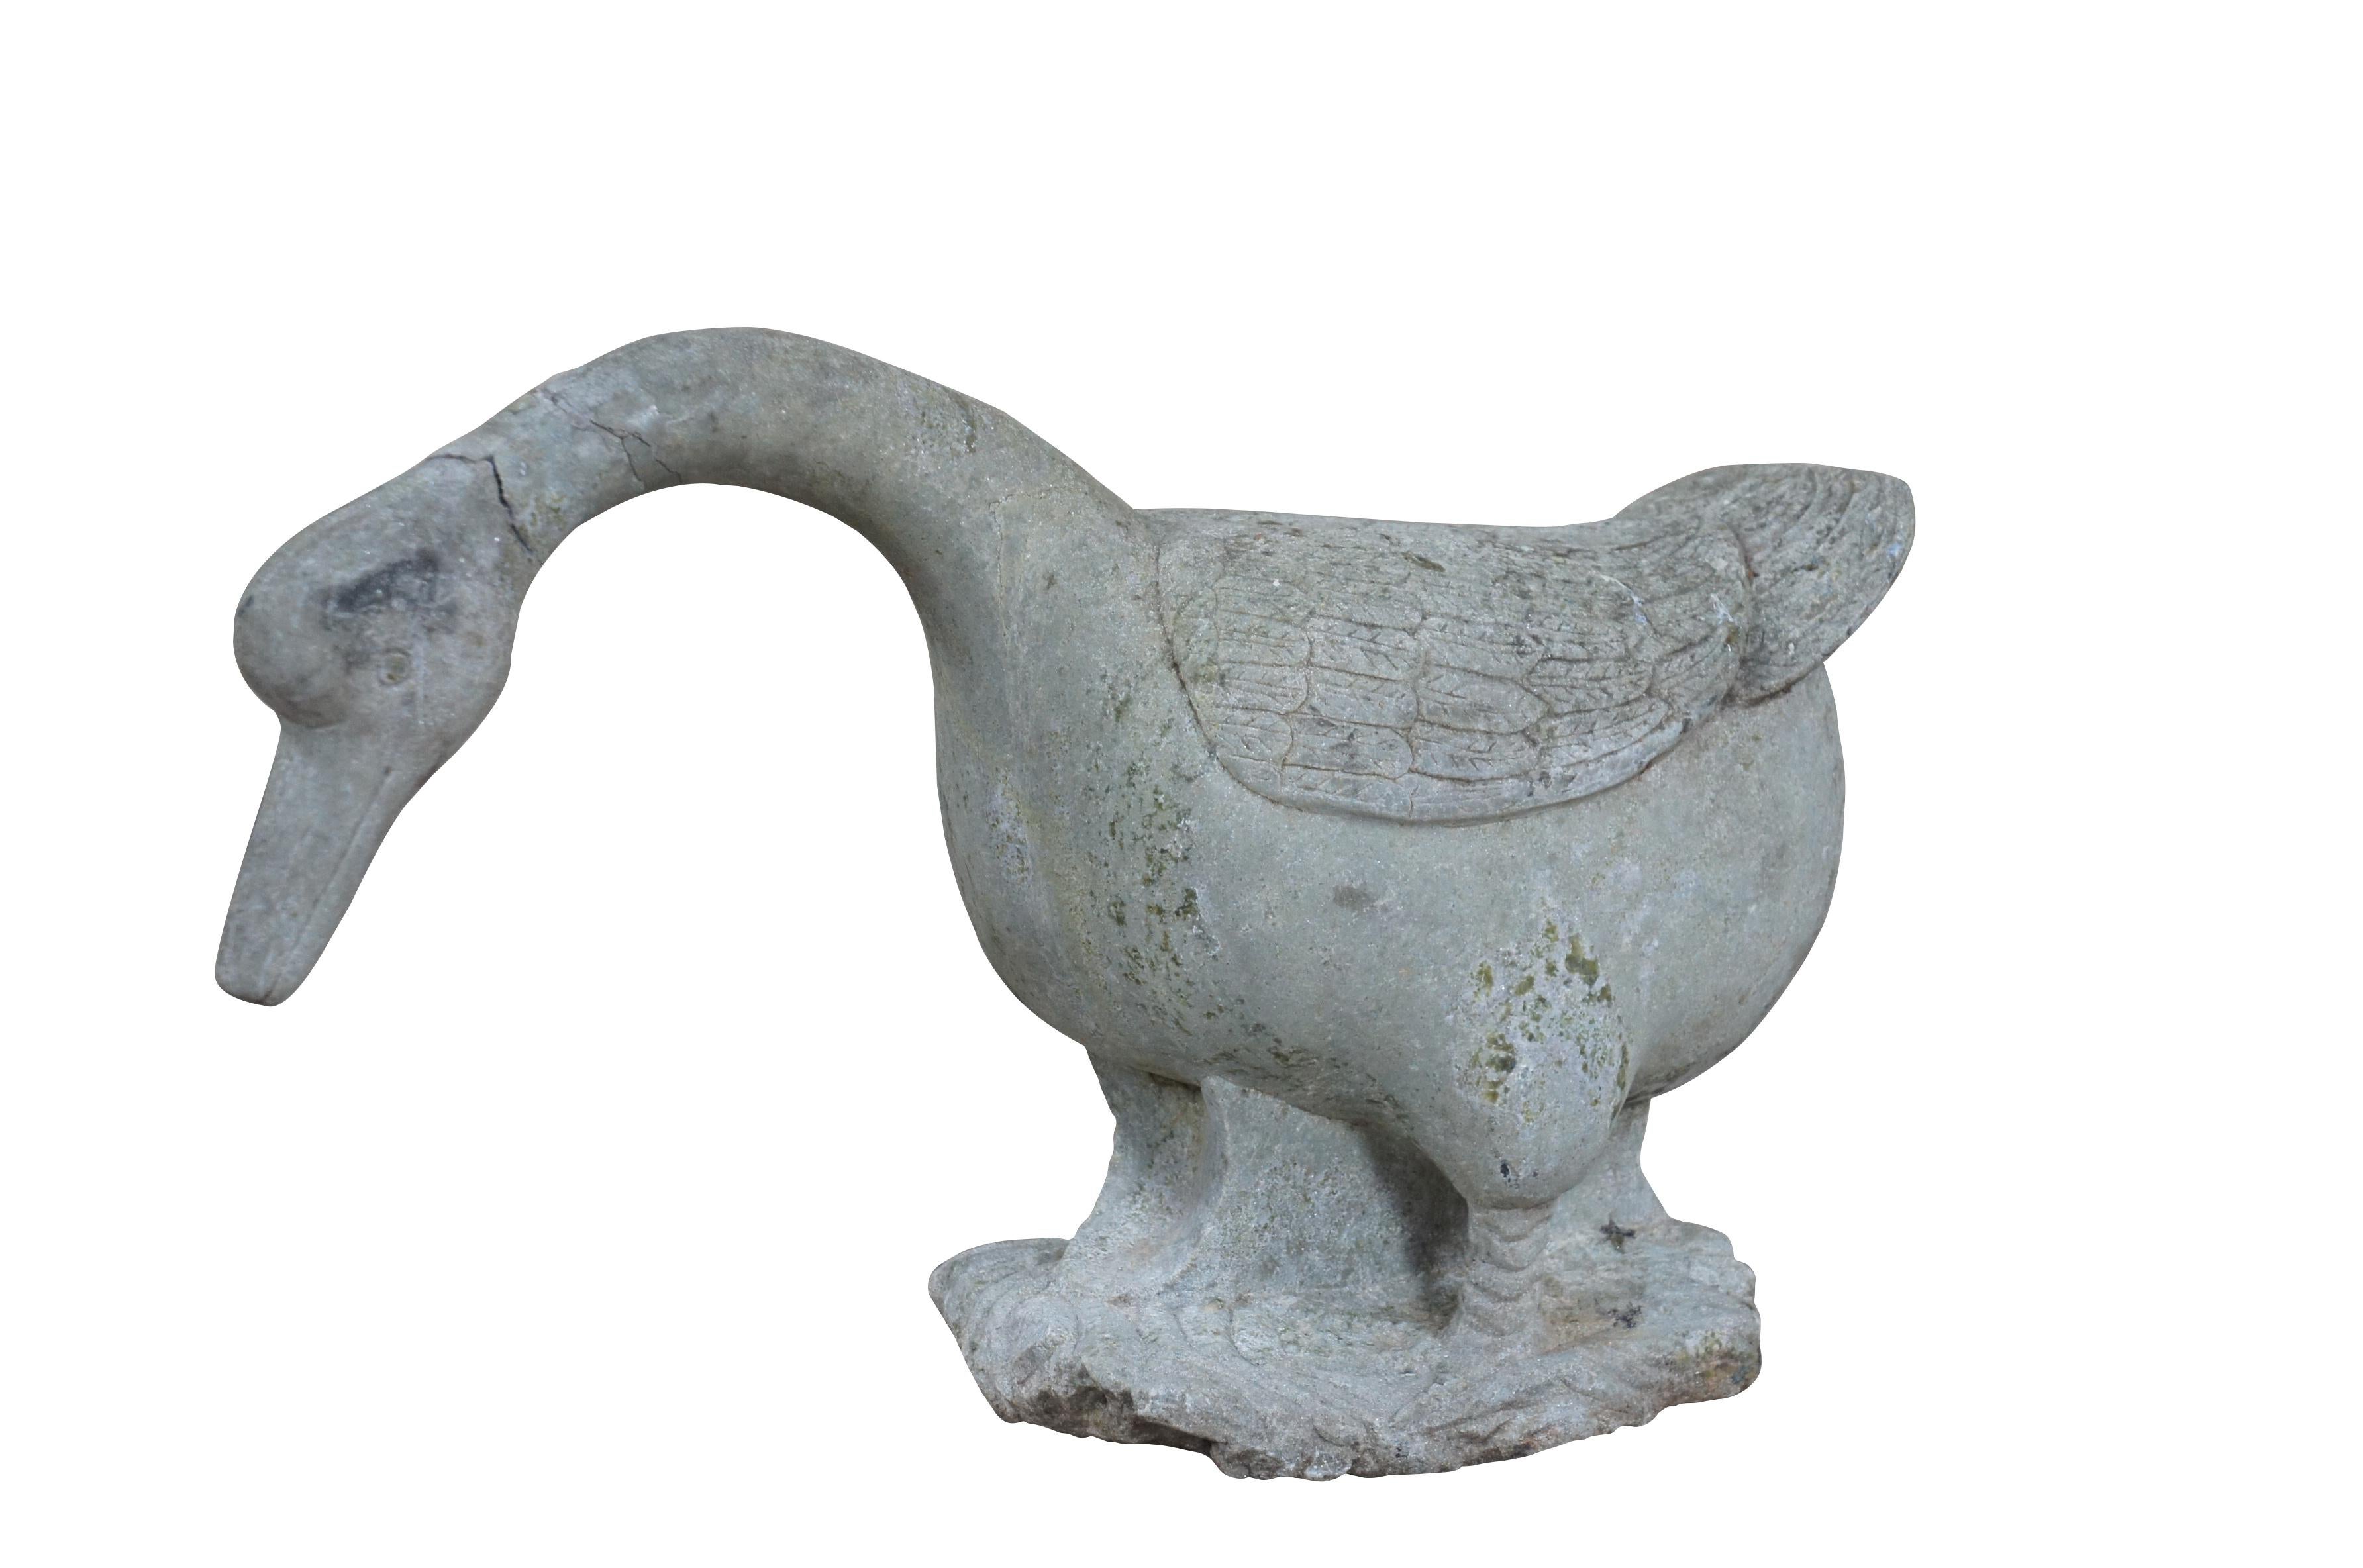 Heavy antique carved stone goose garden sculpture. Made in Italy circa 1930s.

Dimensions:
23.5